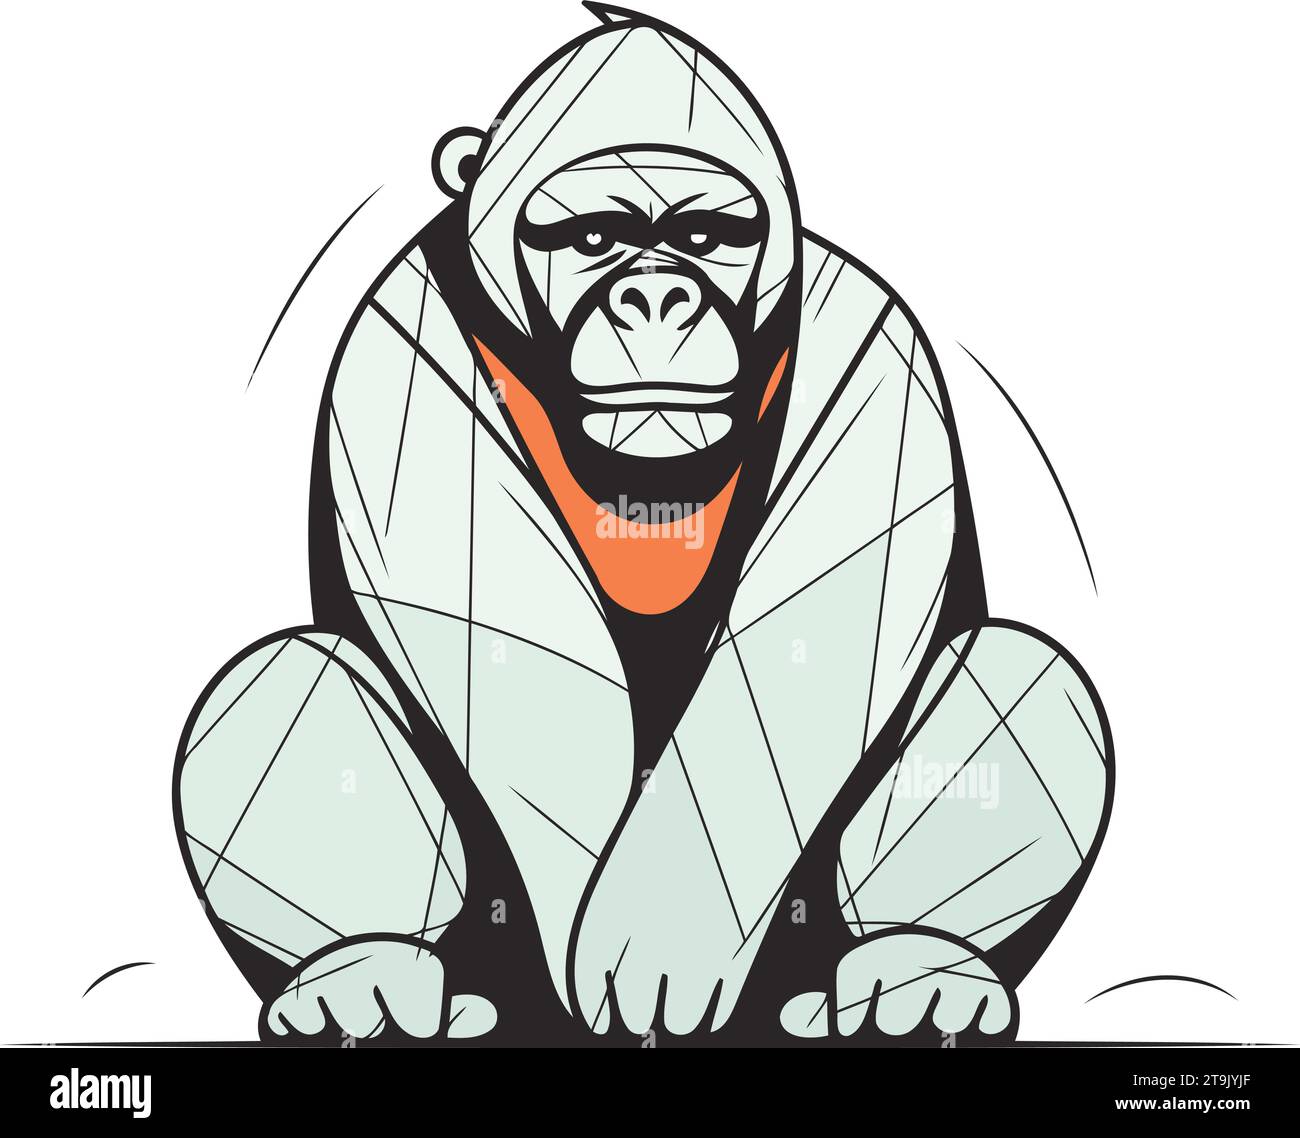 https://c8.alamy.com/comp/2T9JYJF/vector-illustration-of-a-gorilla-in-a-suit-on-a-white-background-2T9JYJF.jpg